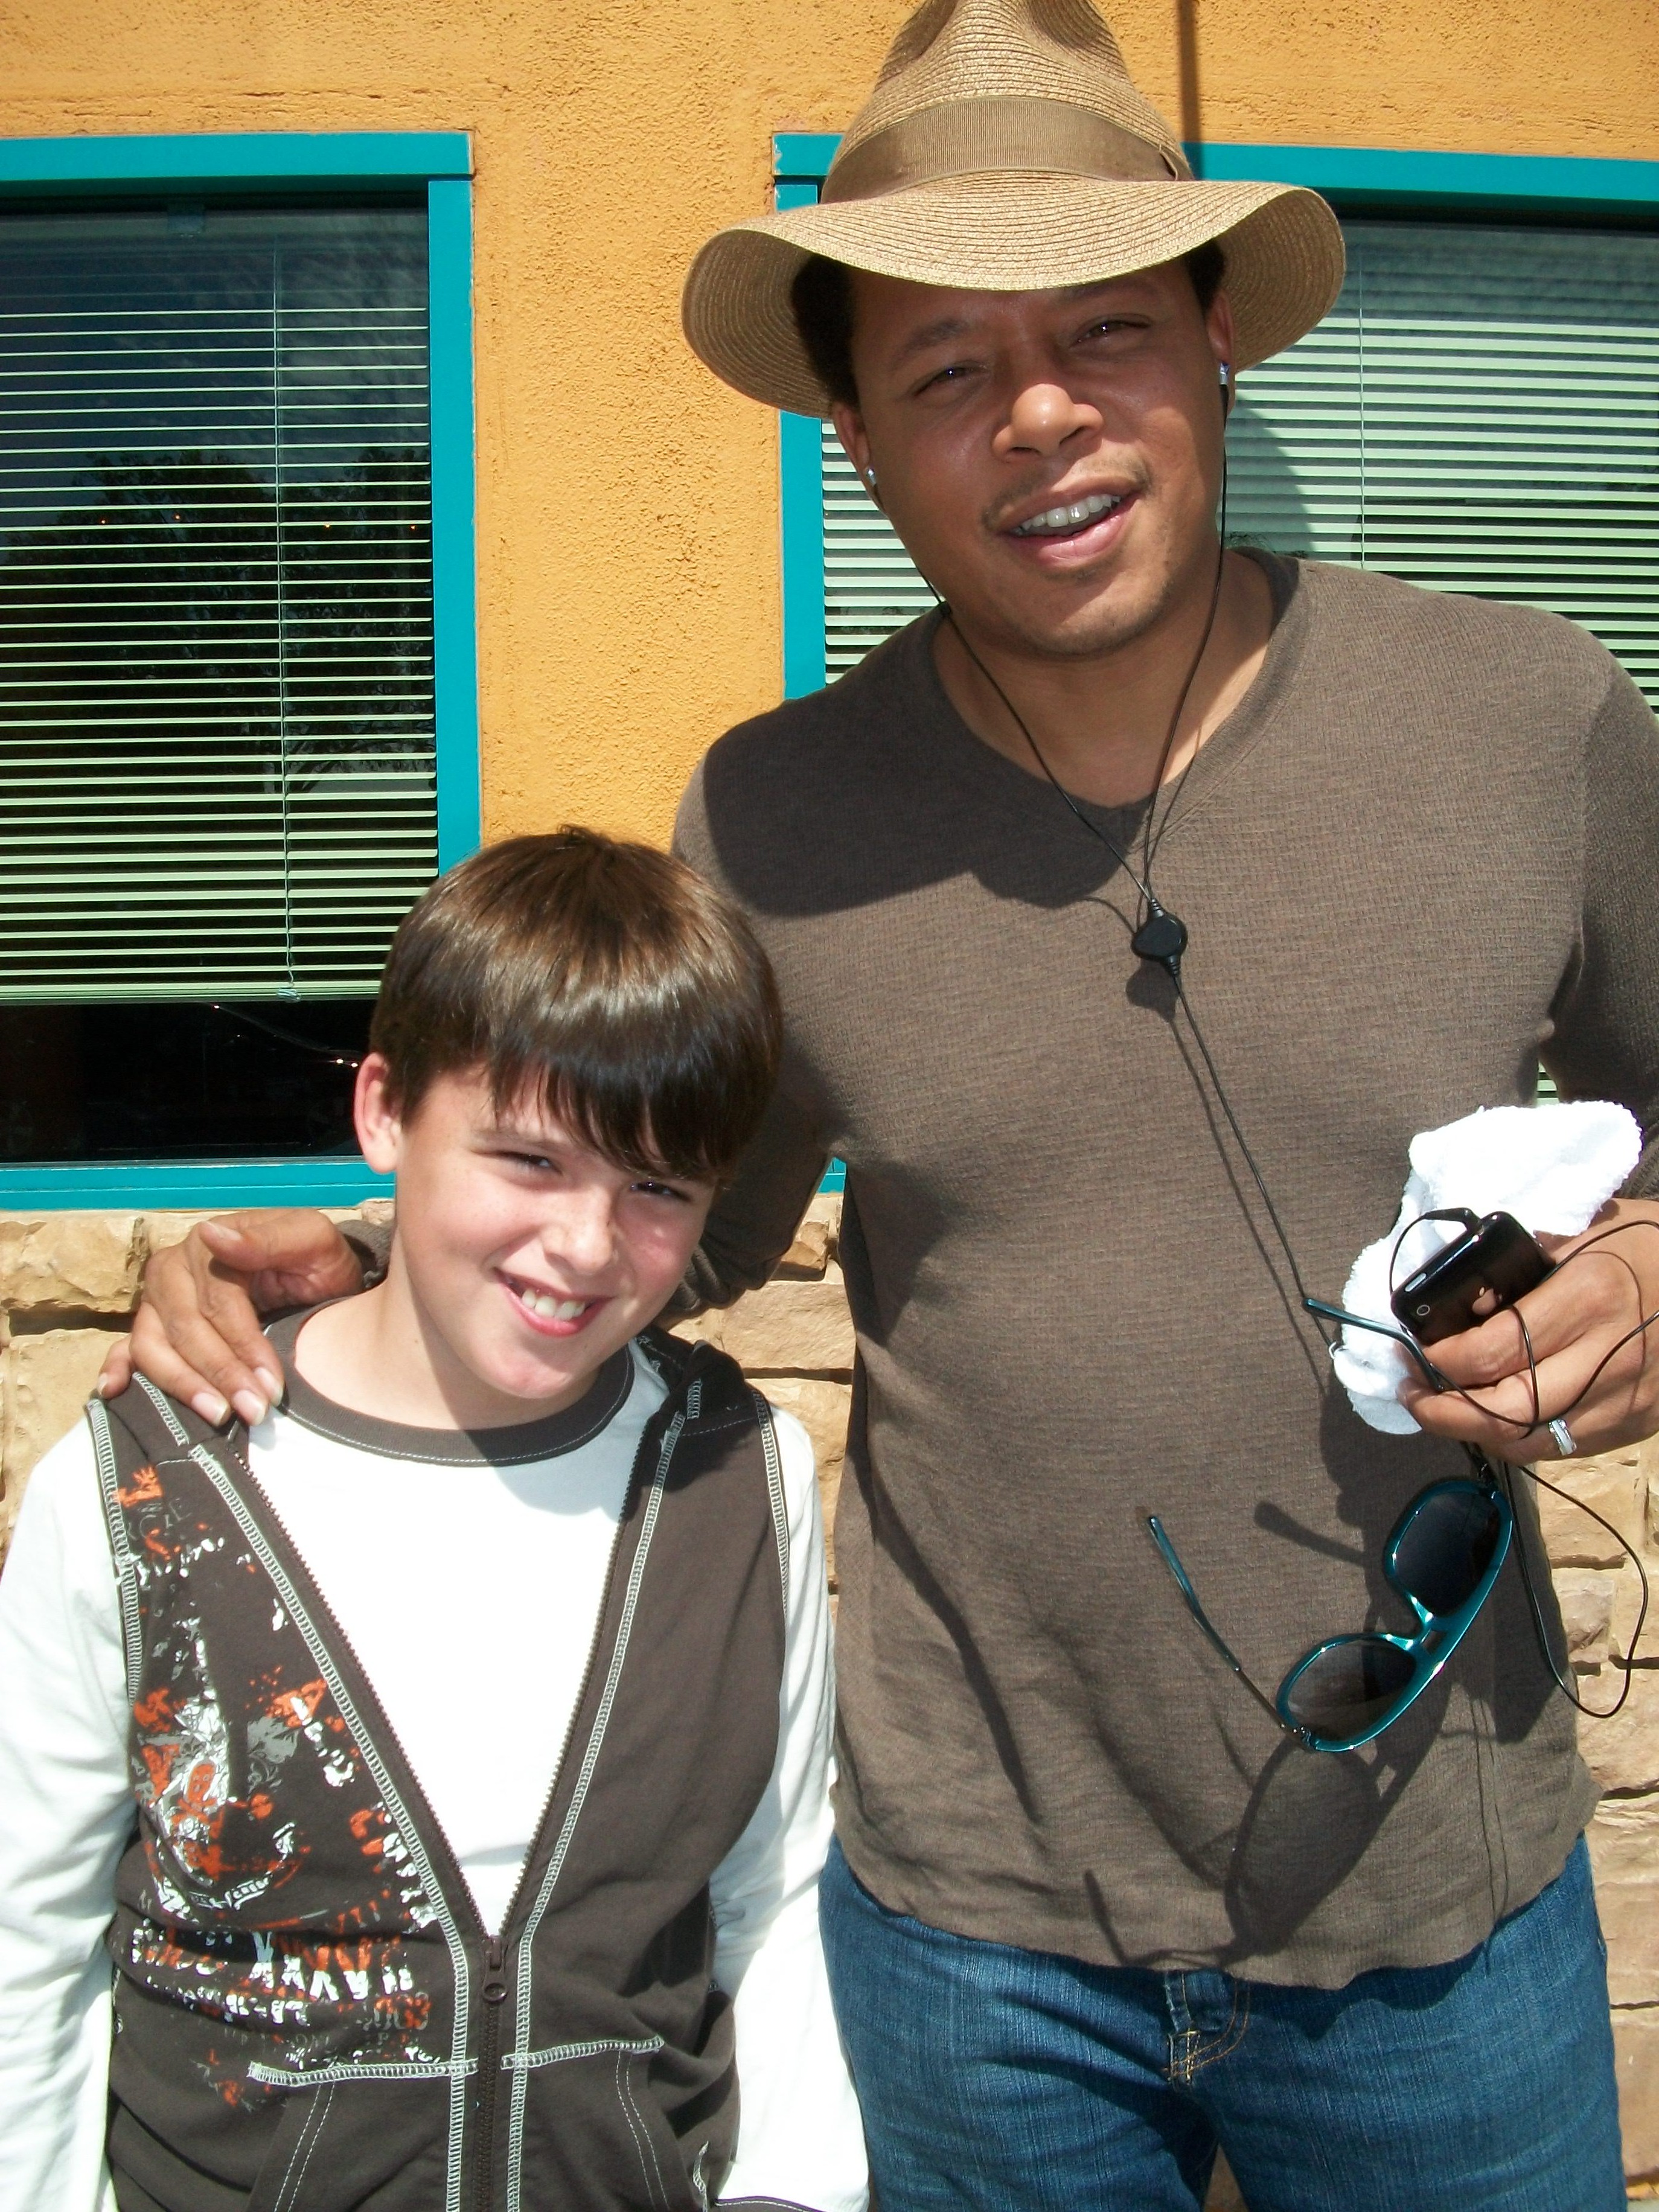 Austin having lunch with Terrance Howard in Hollywood